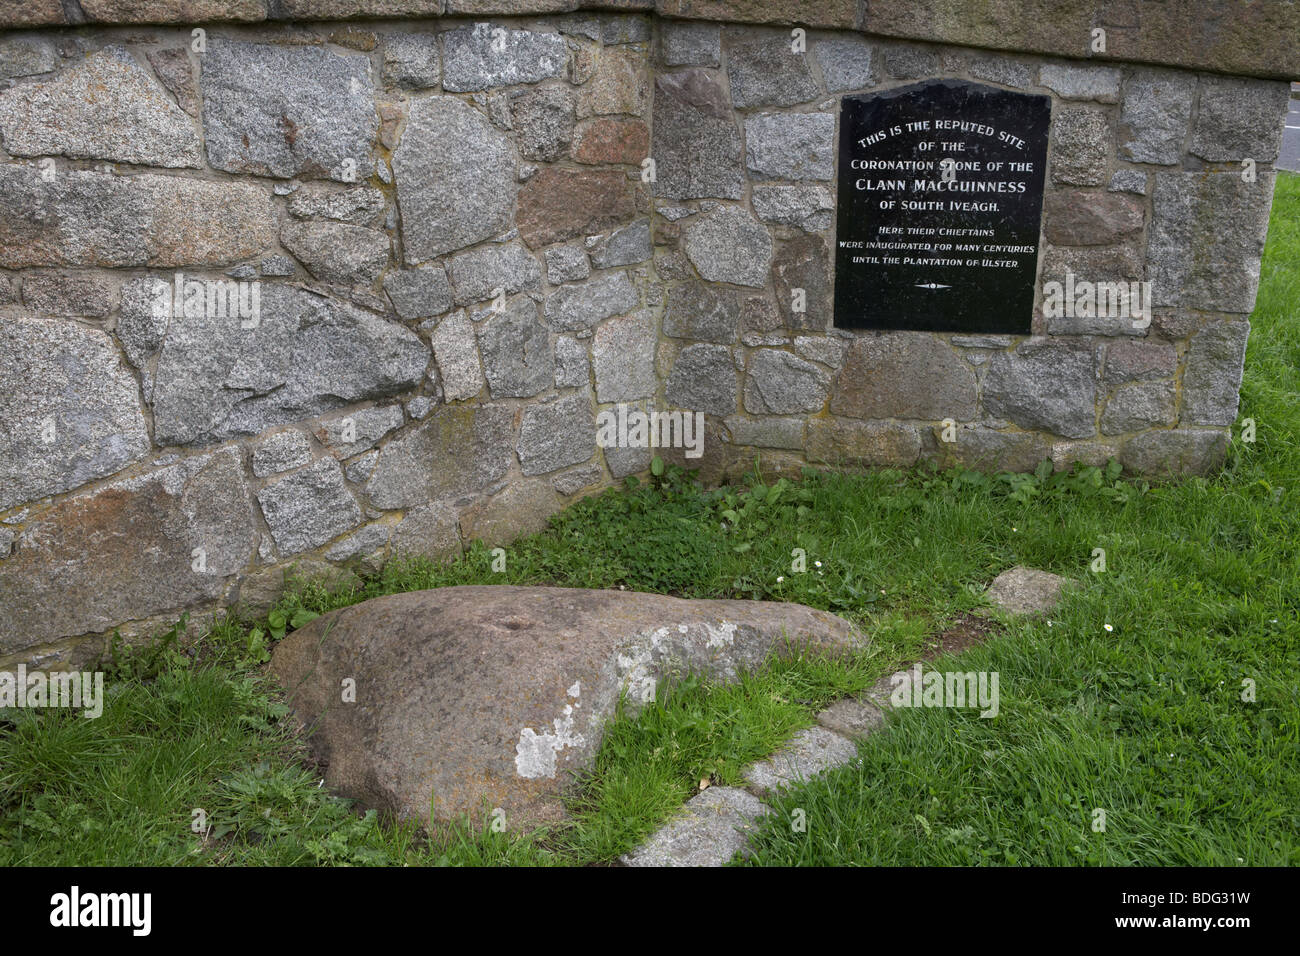 ancient coronation stone of the magennis clan in warrenpoint county down northern ireland uk Stock Photo